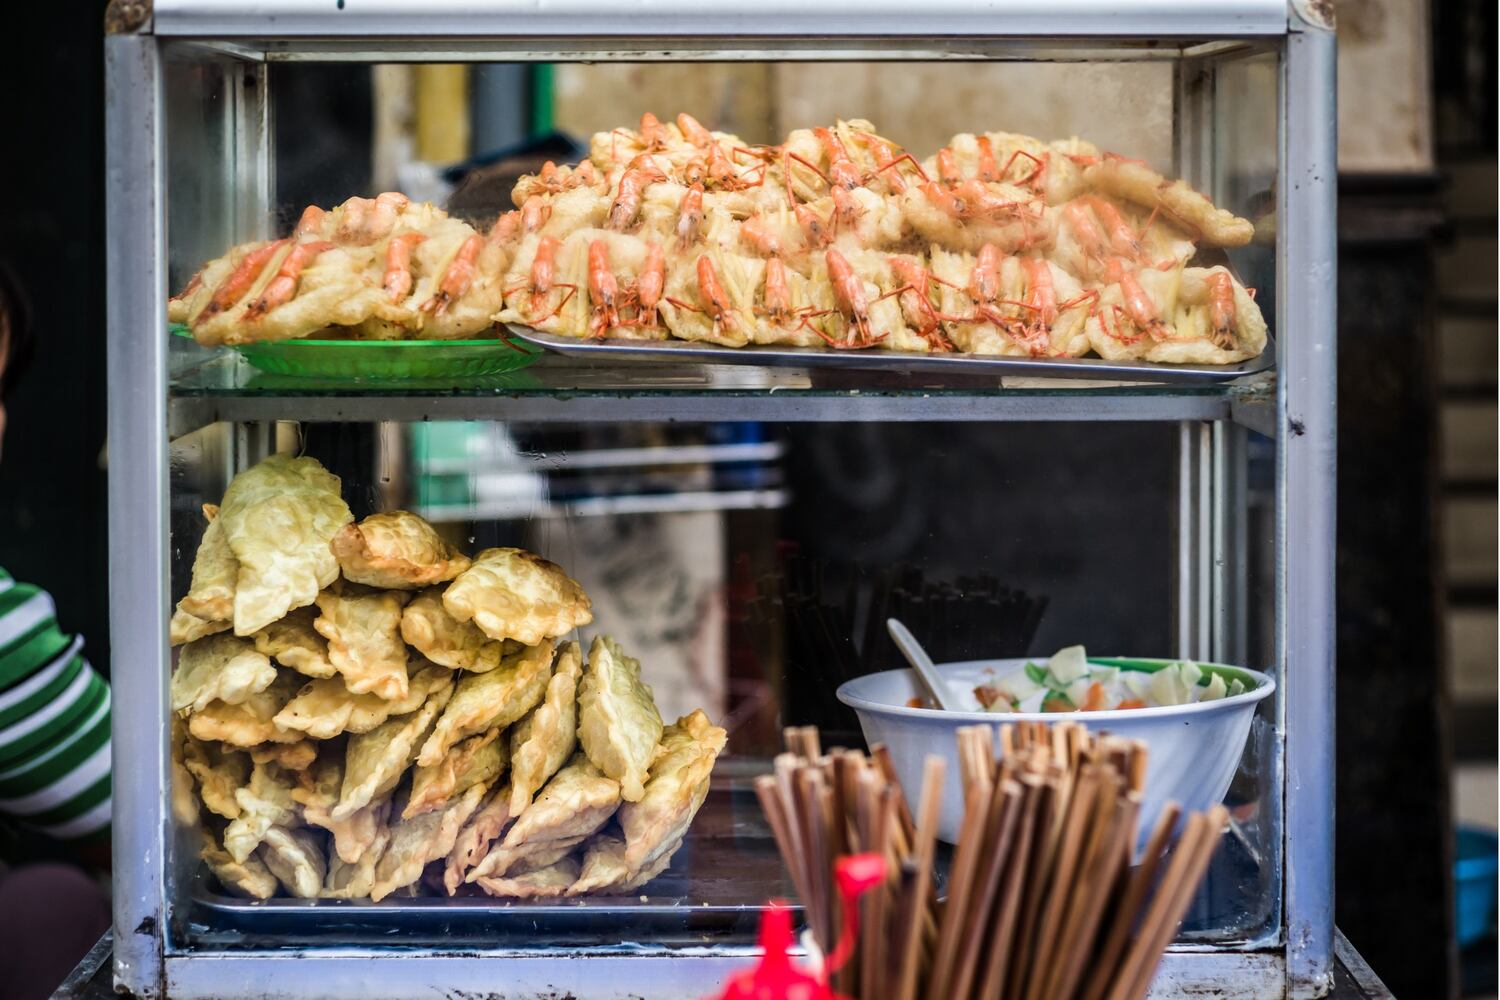 Street food stall in Vietnam showcasing a glass case filled with crispy fried spring rolls.